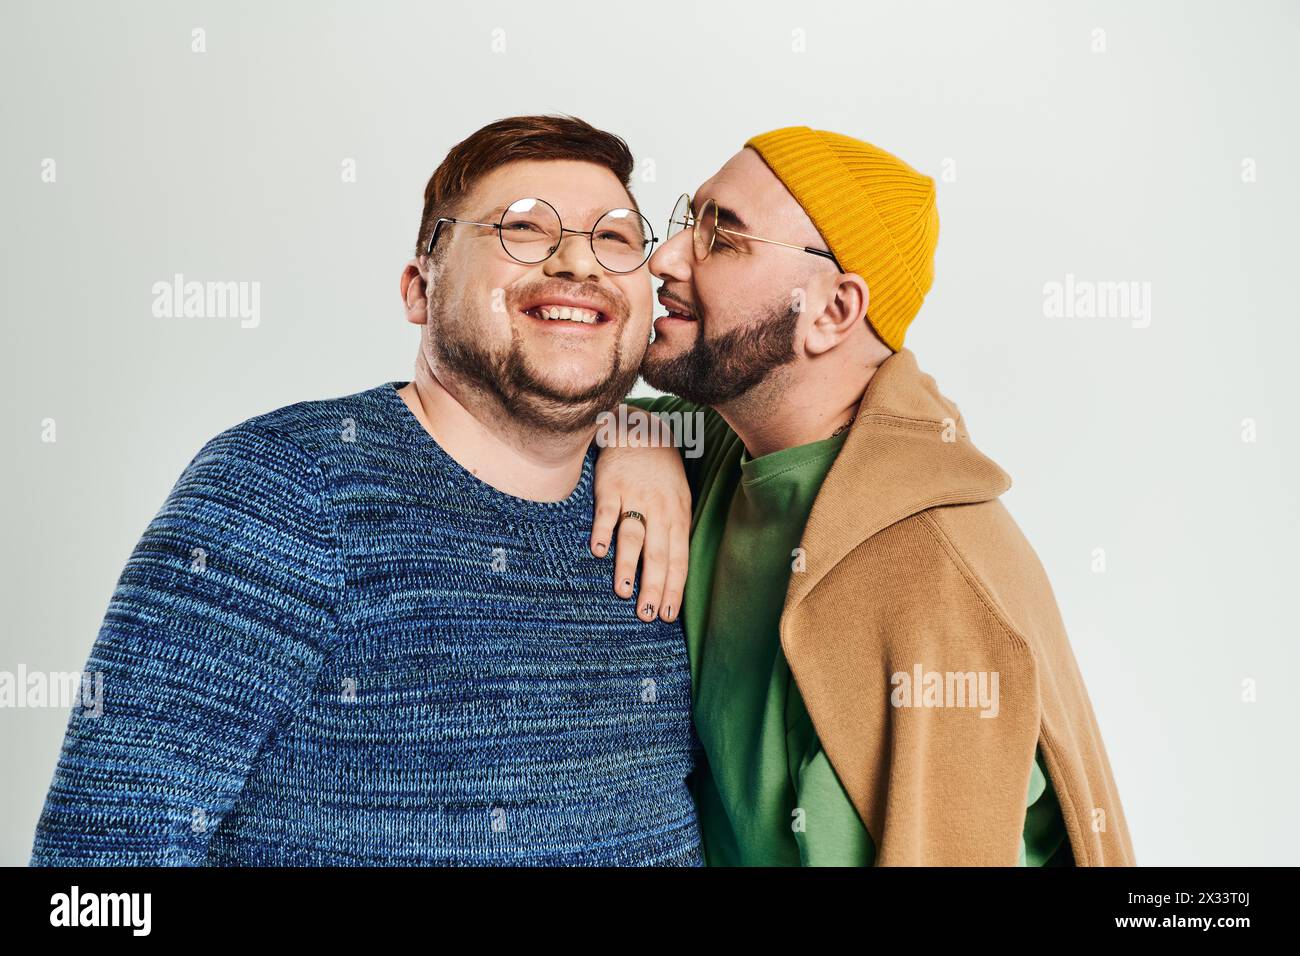 A loving duo of men standing beside each other. Stock Photo